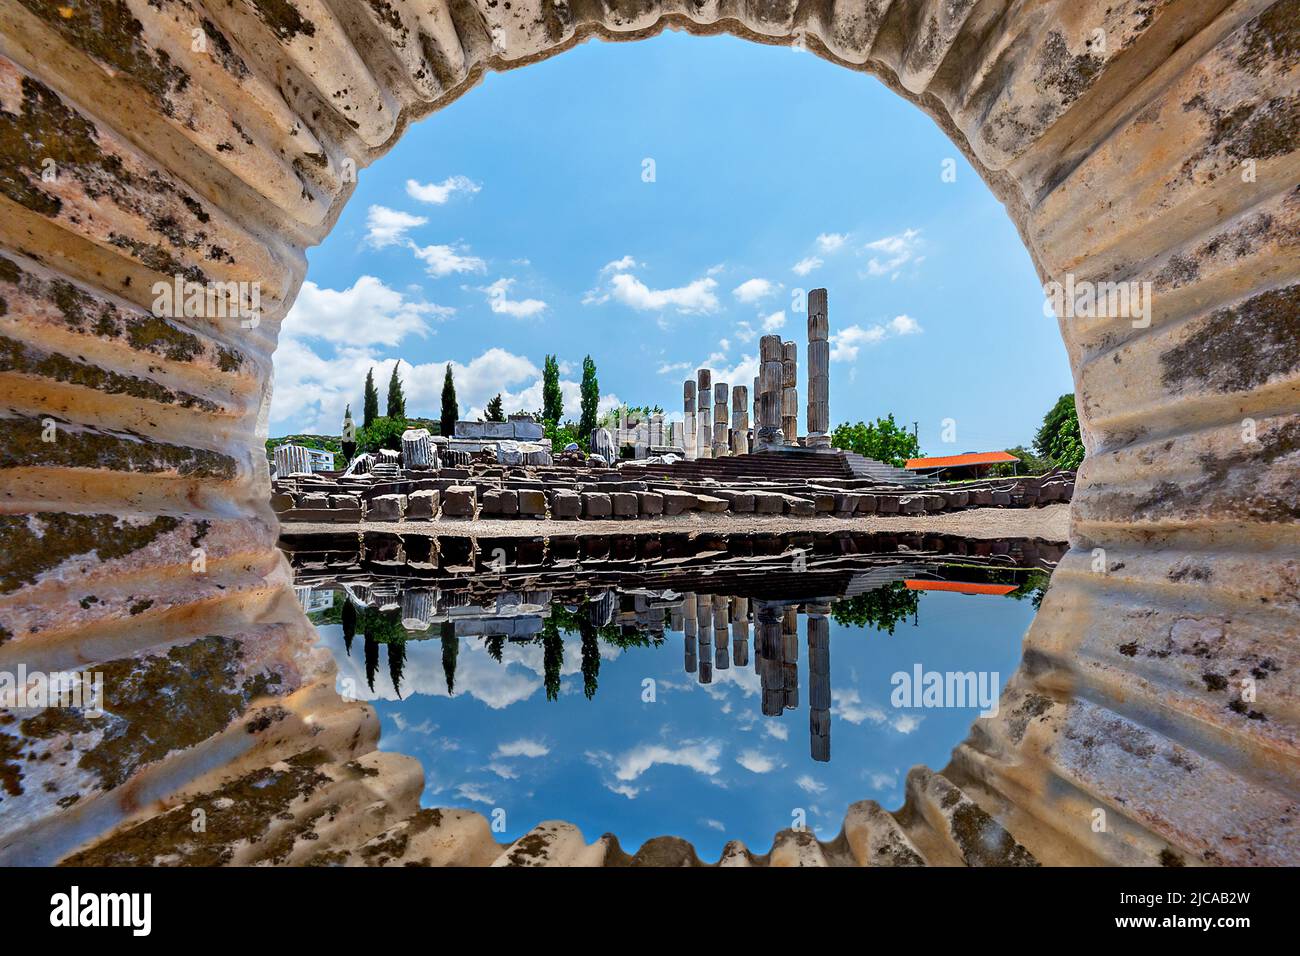 Ruins of the sanctuary of Apollon Smintheus and its reflection in the puddle through the carved out marble column in Ayvacik, Turkey. Stock Photo